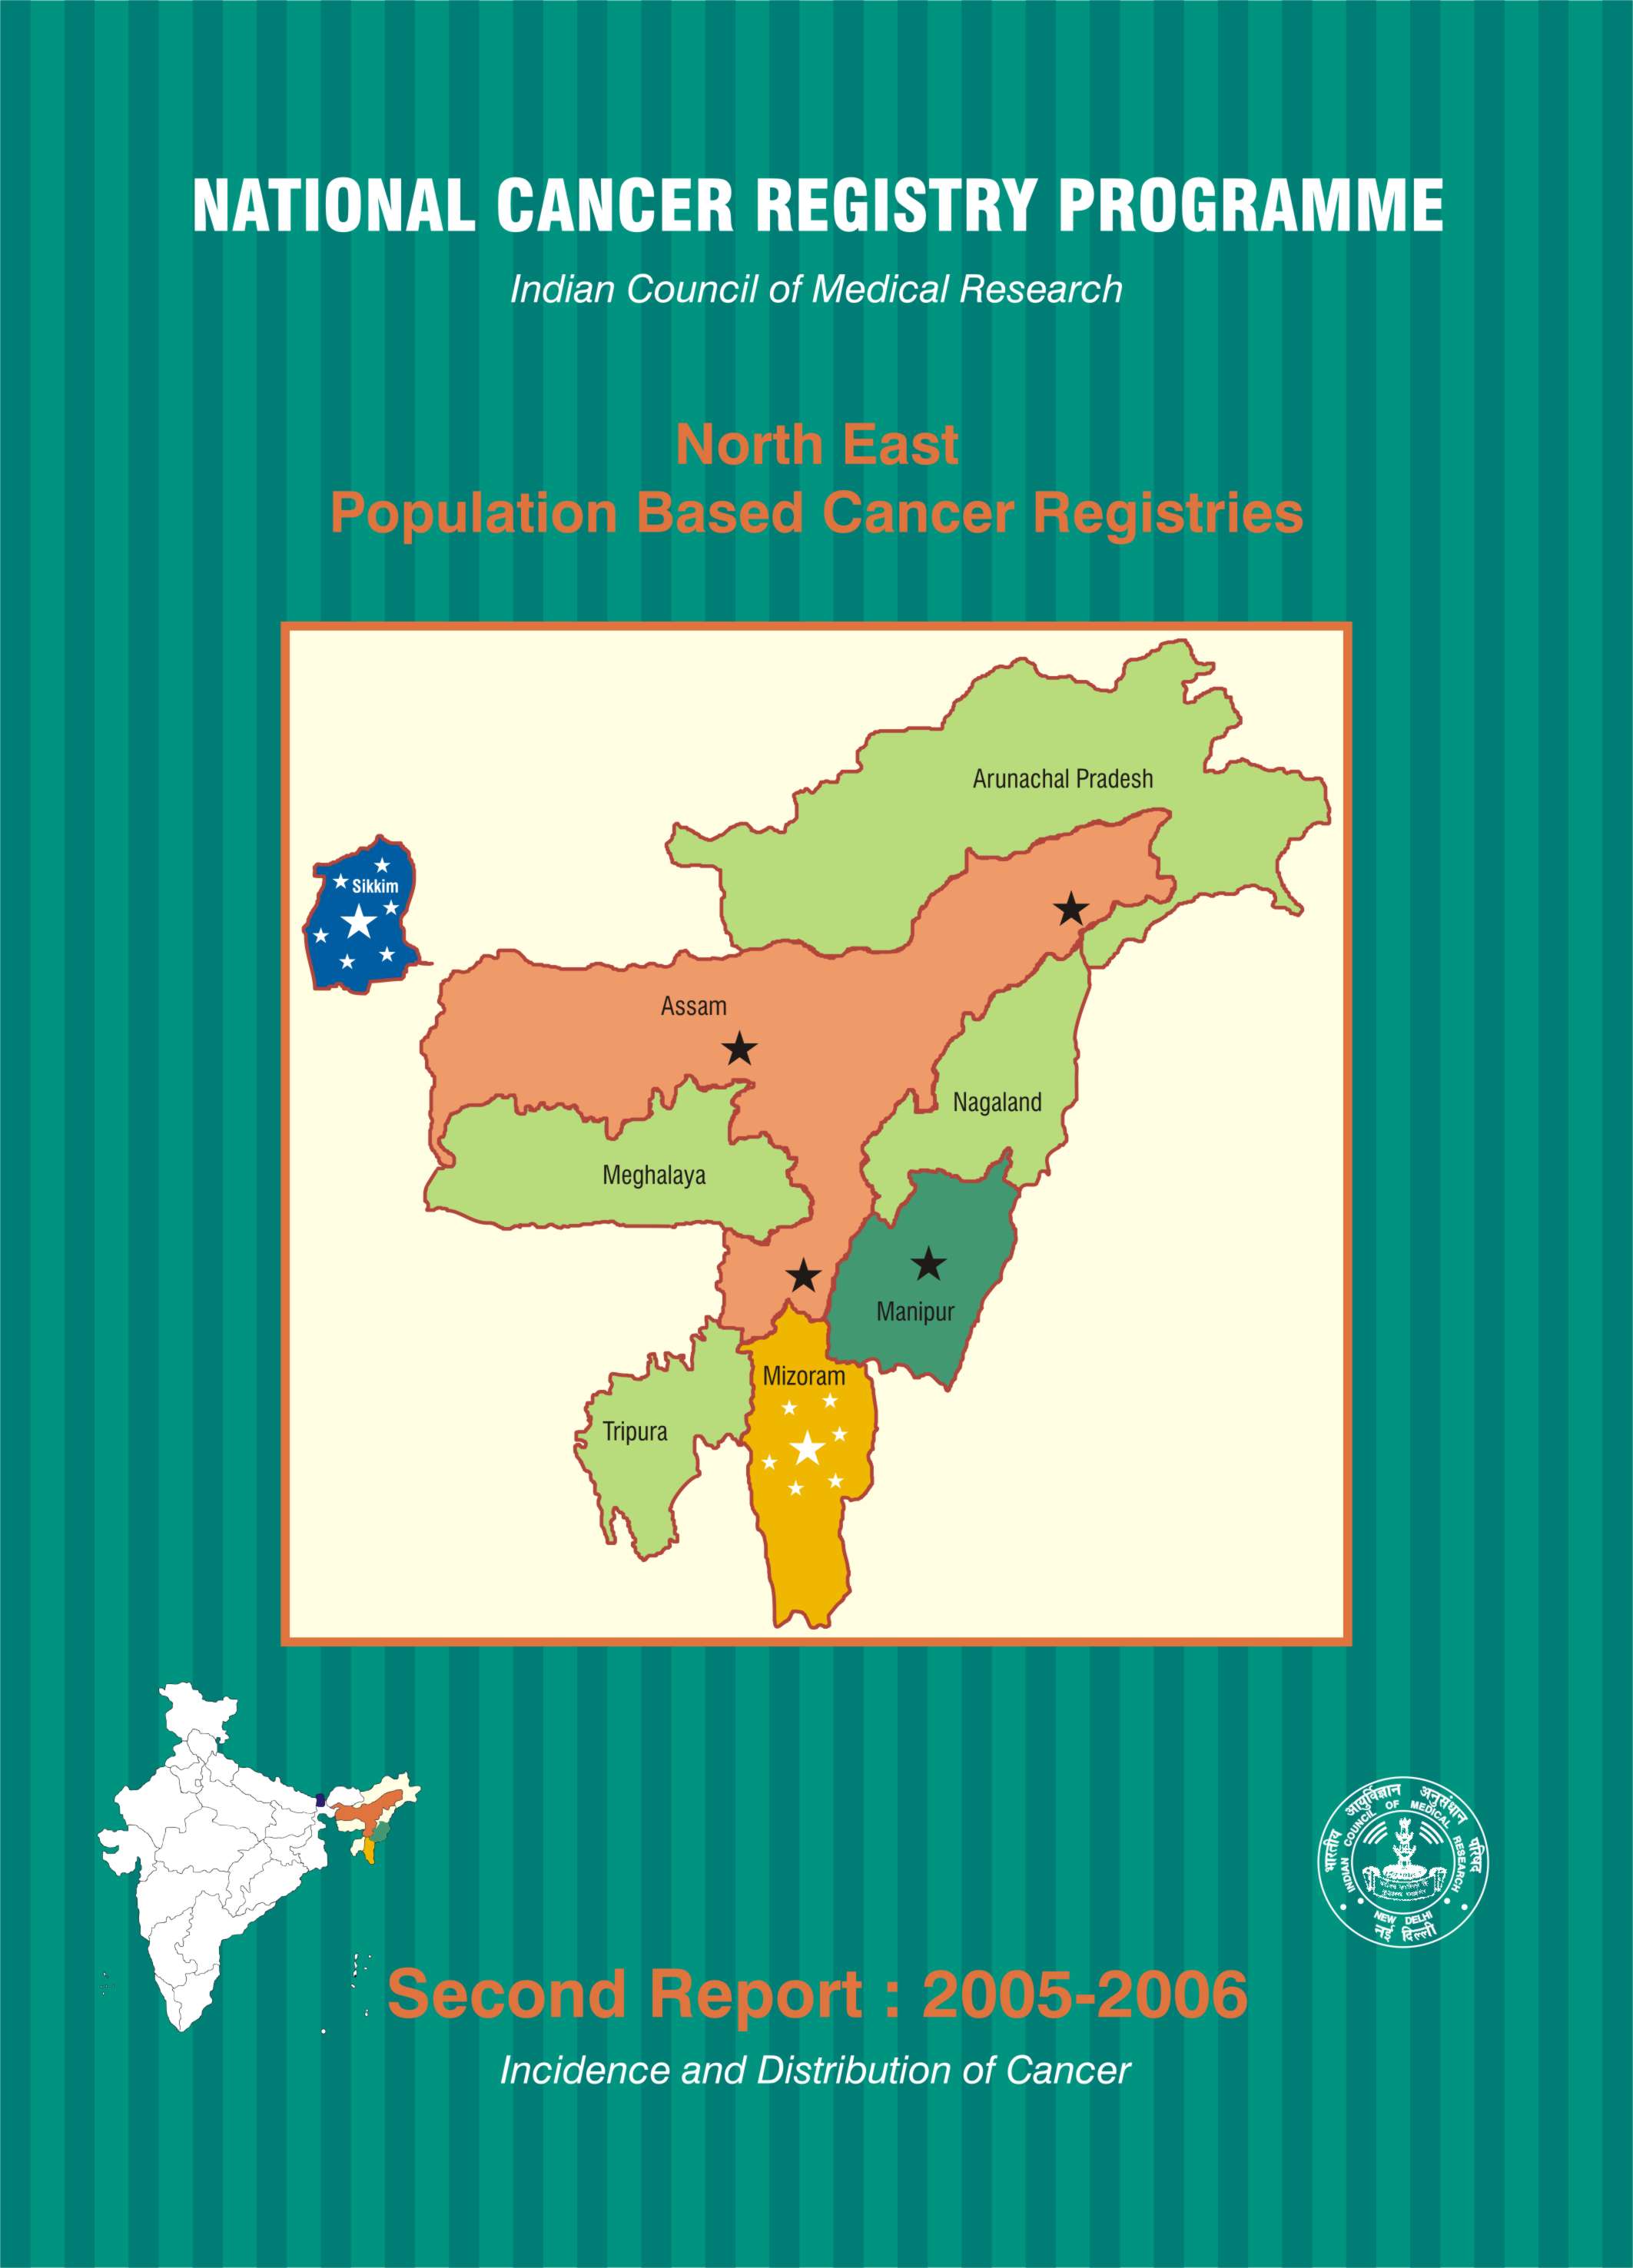 Second Report of the North East Population Based Cancer Registries 2005-2006